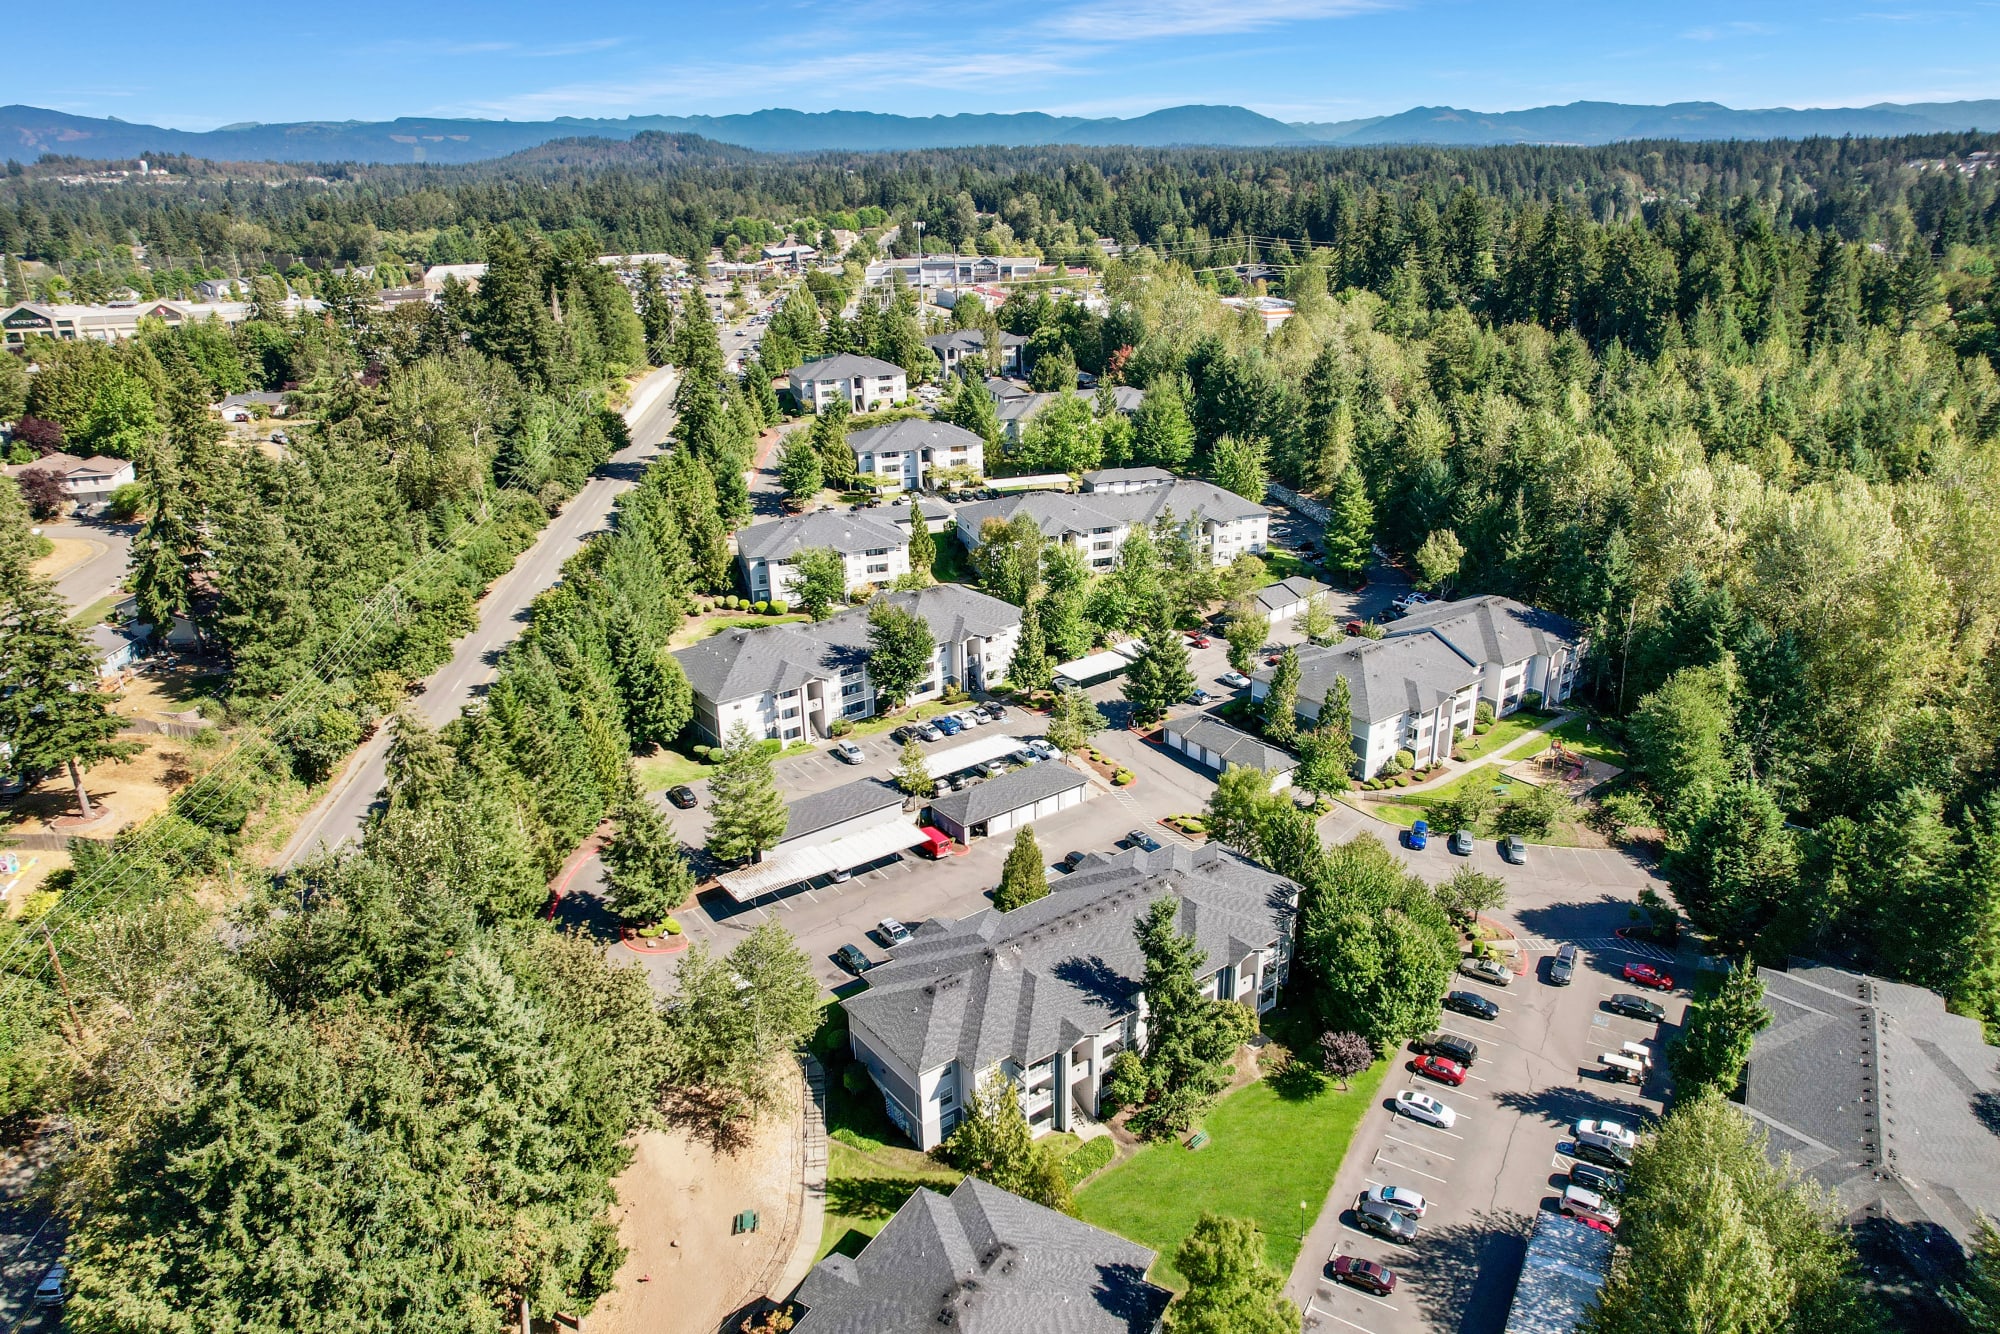 Aerial view of the property and surrounding area at Pebble Cove Apartments in Renton, Washington